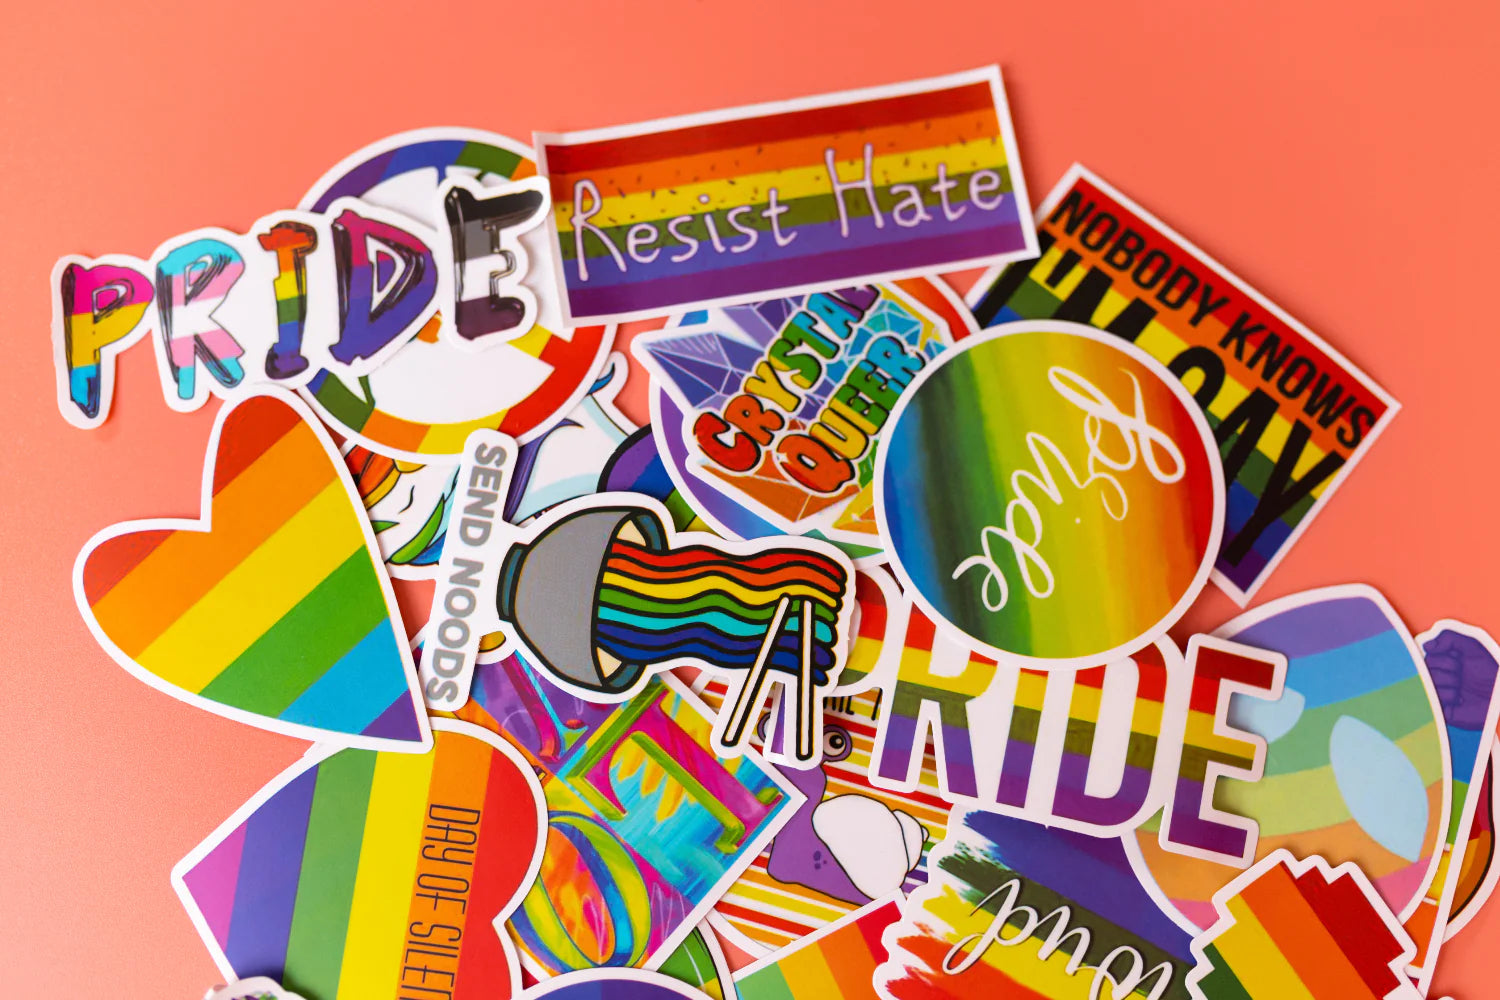 A batch of LGBTQ+ stickers in a pile on a table